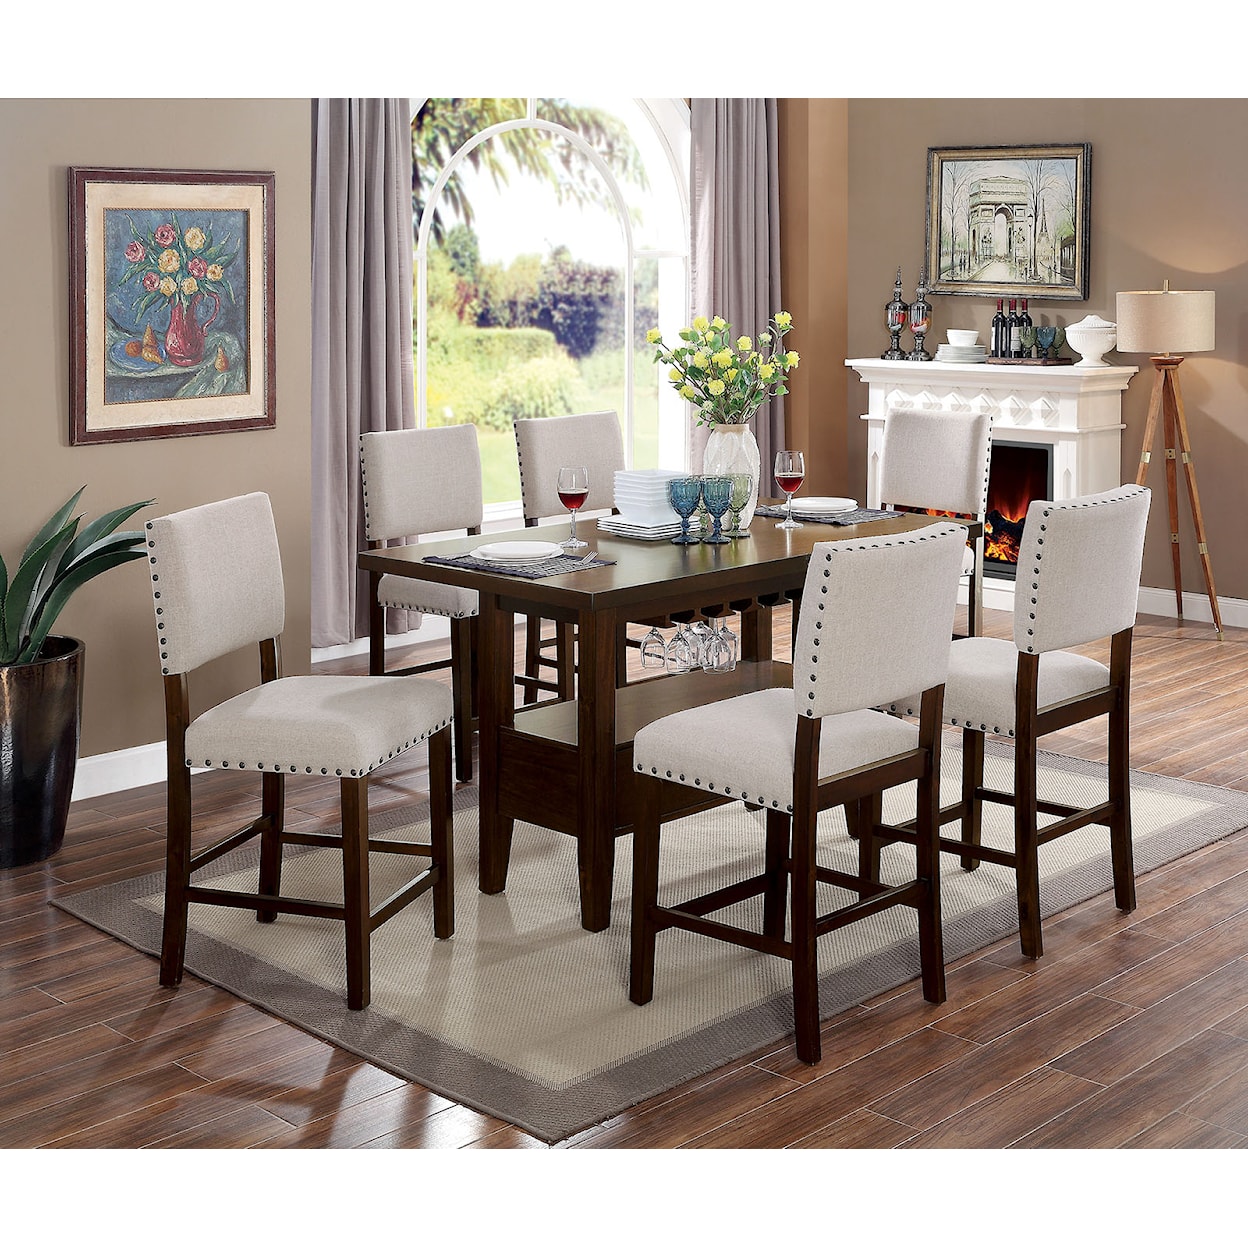 Furniture of America Lordello 7-Piece Counter Height Dining Table Set